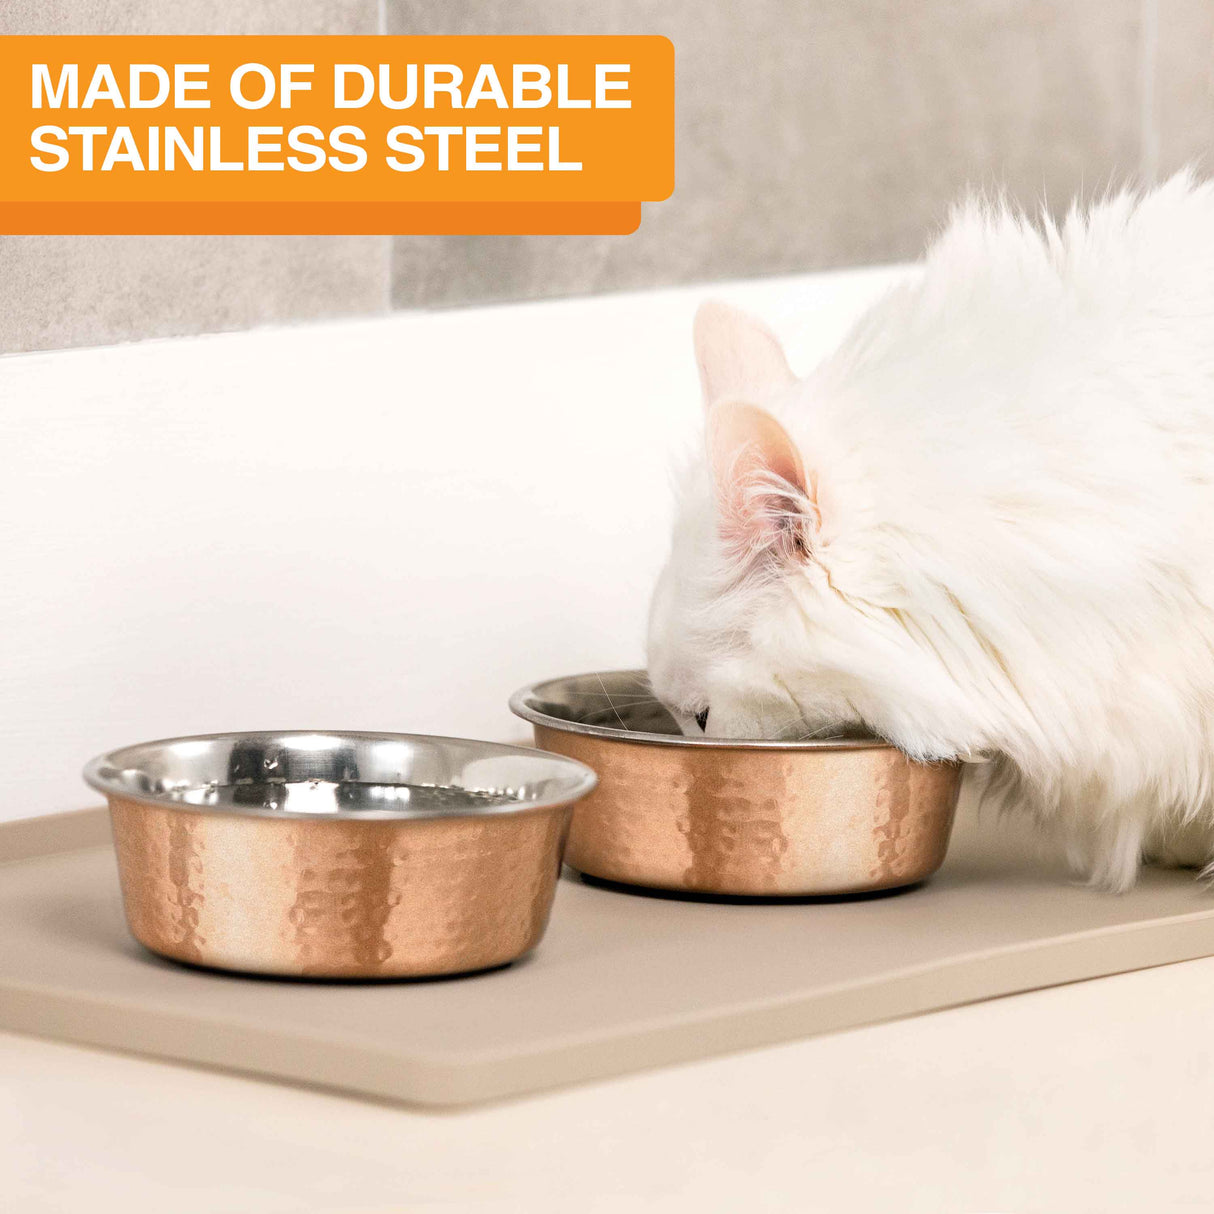 The Hammered Copper Finish Bowl and a cat eating from the bowl - made of durable stainless steel